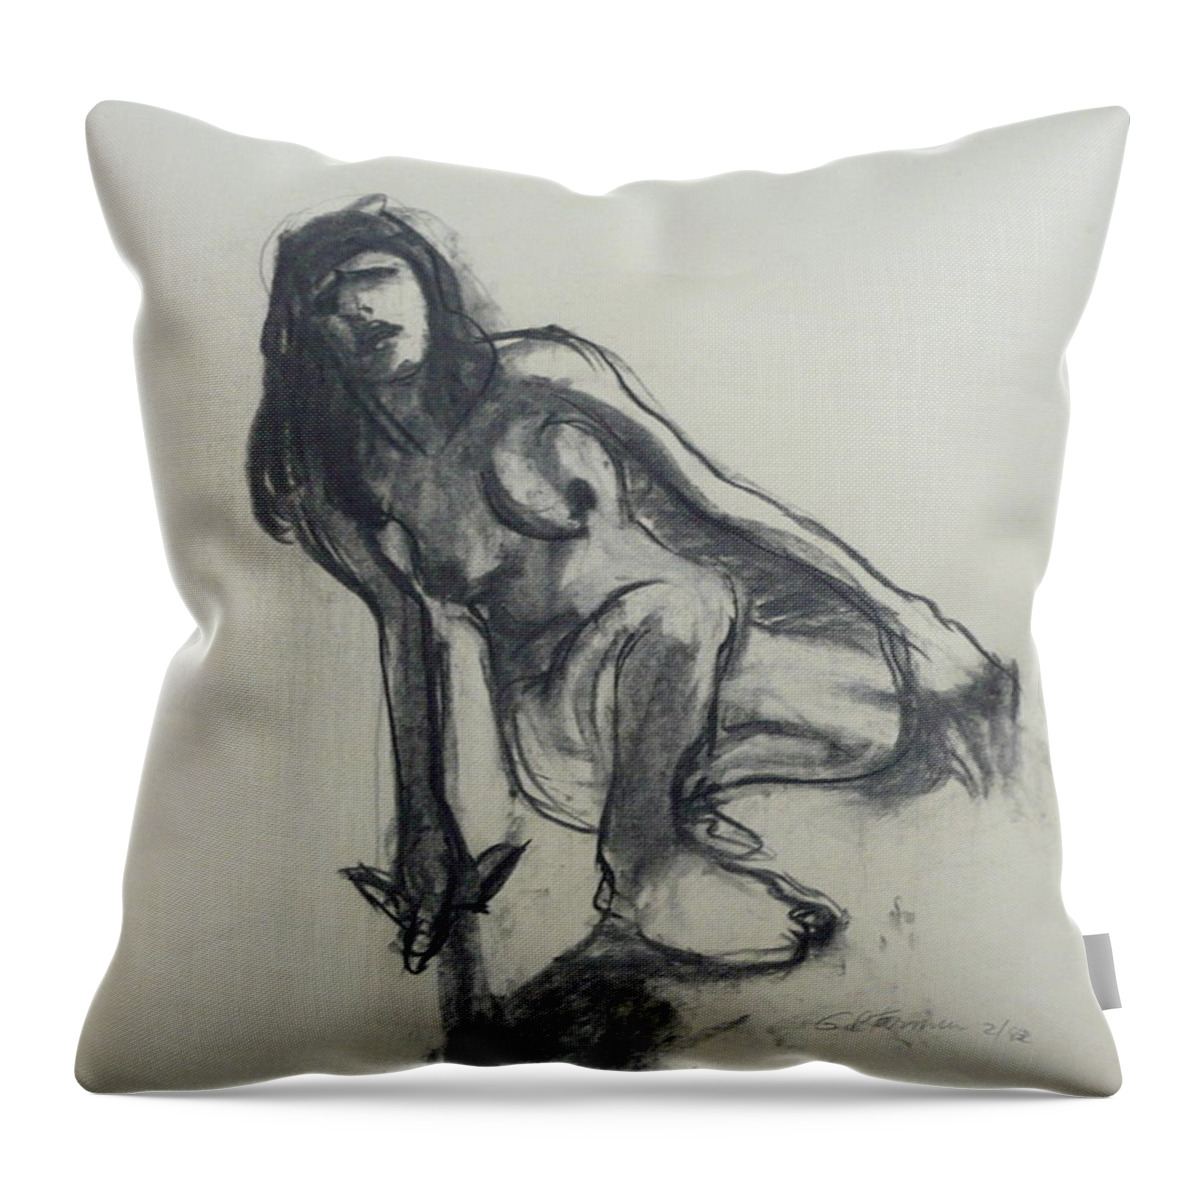 Nude Throw Pillow featuring the drawing Reclining Nude by Galya Tarmu